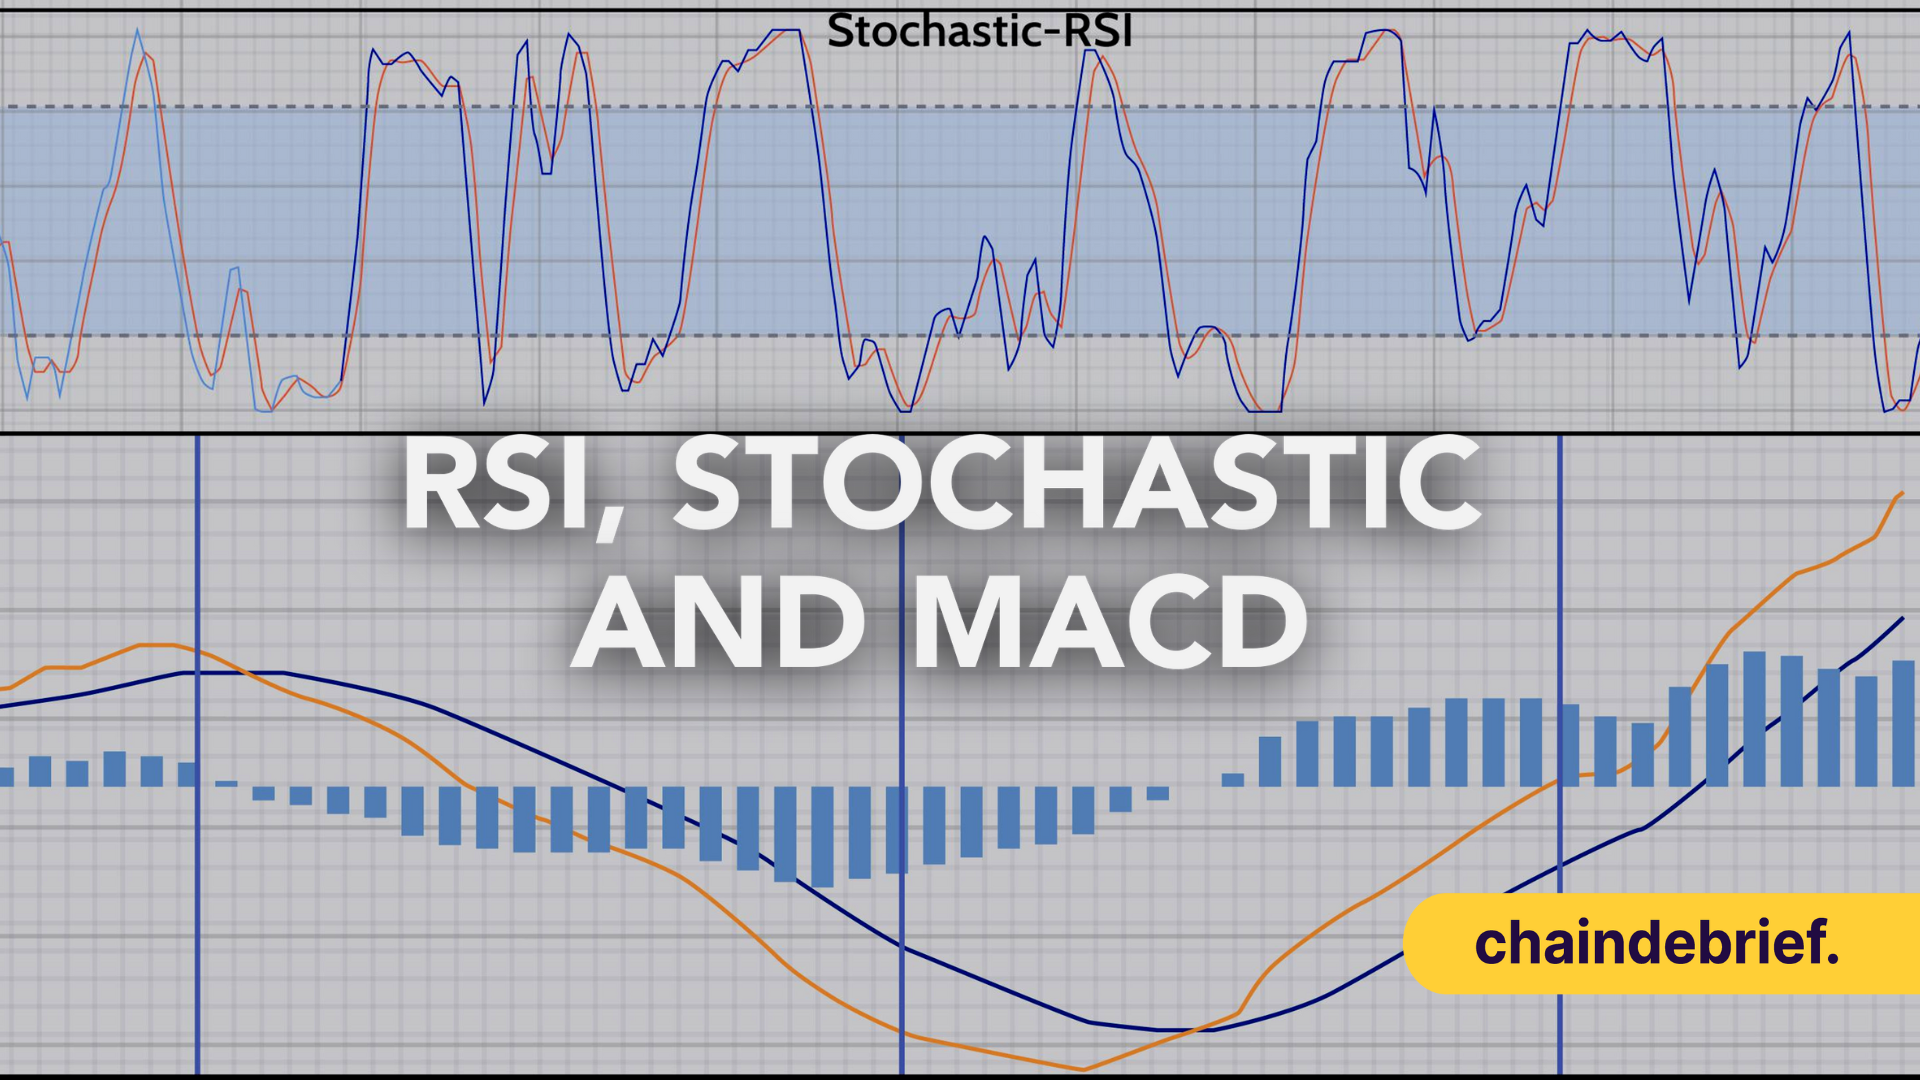 Triple Threat Trading Strategy: The MACD, Stochastic and RSI